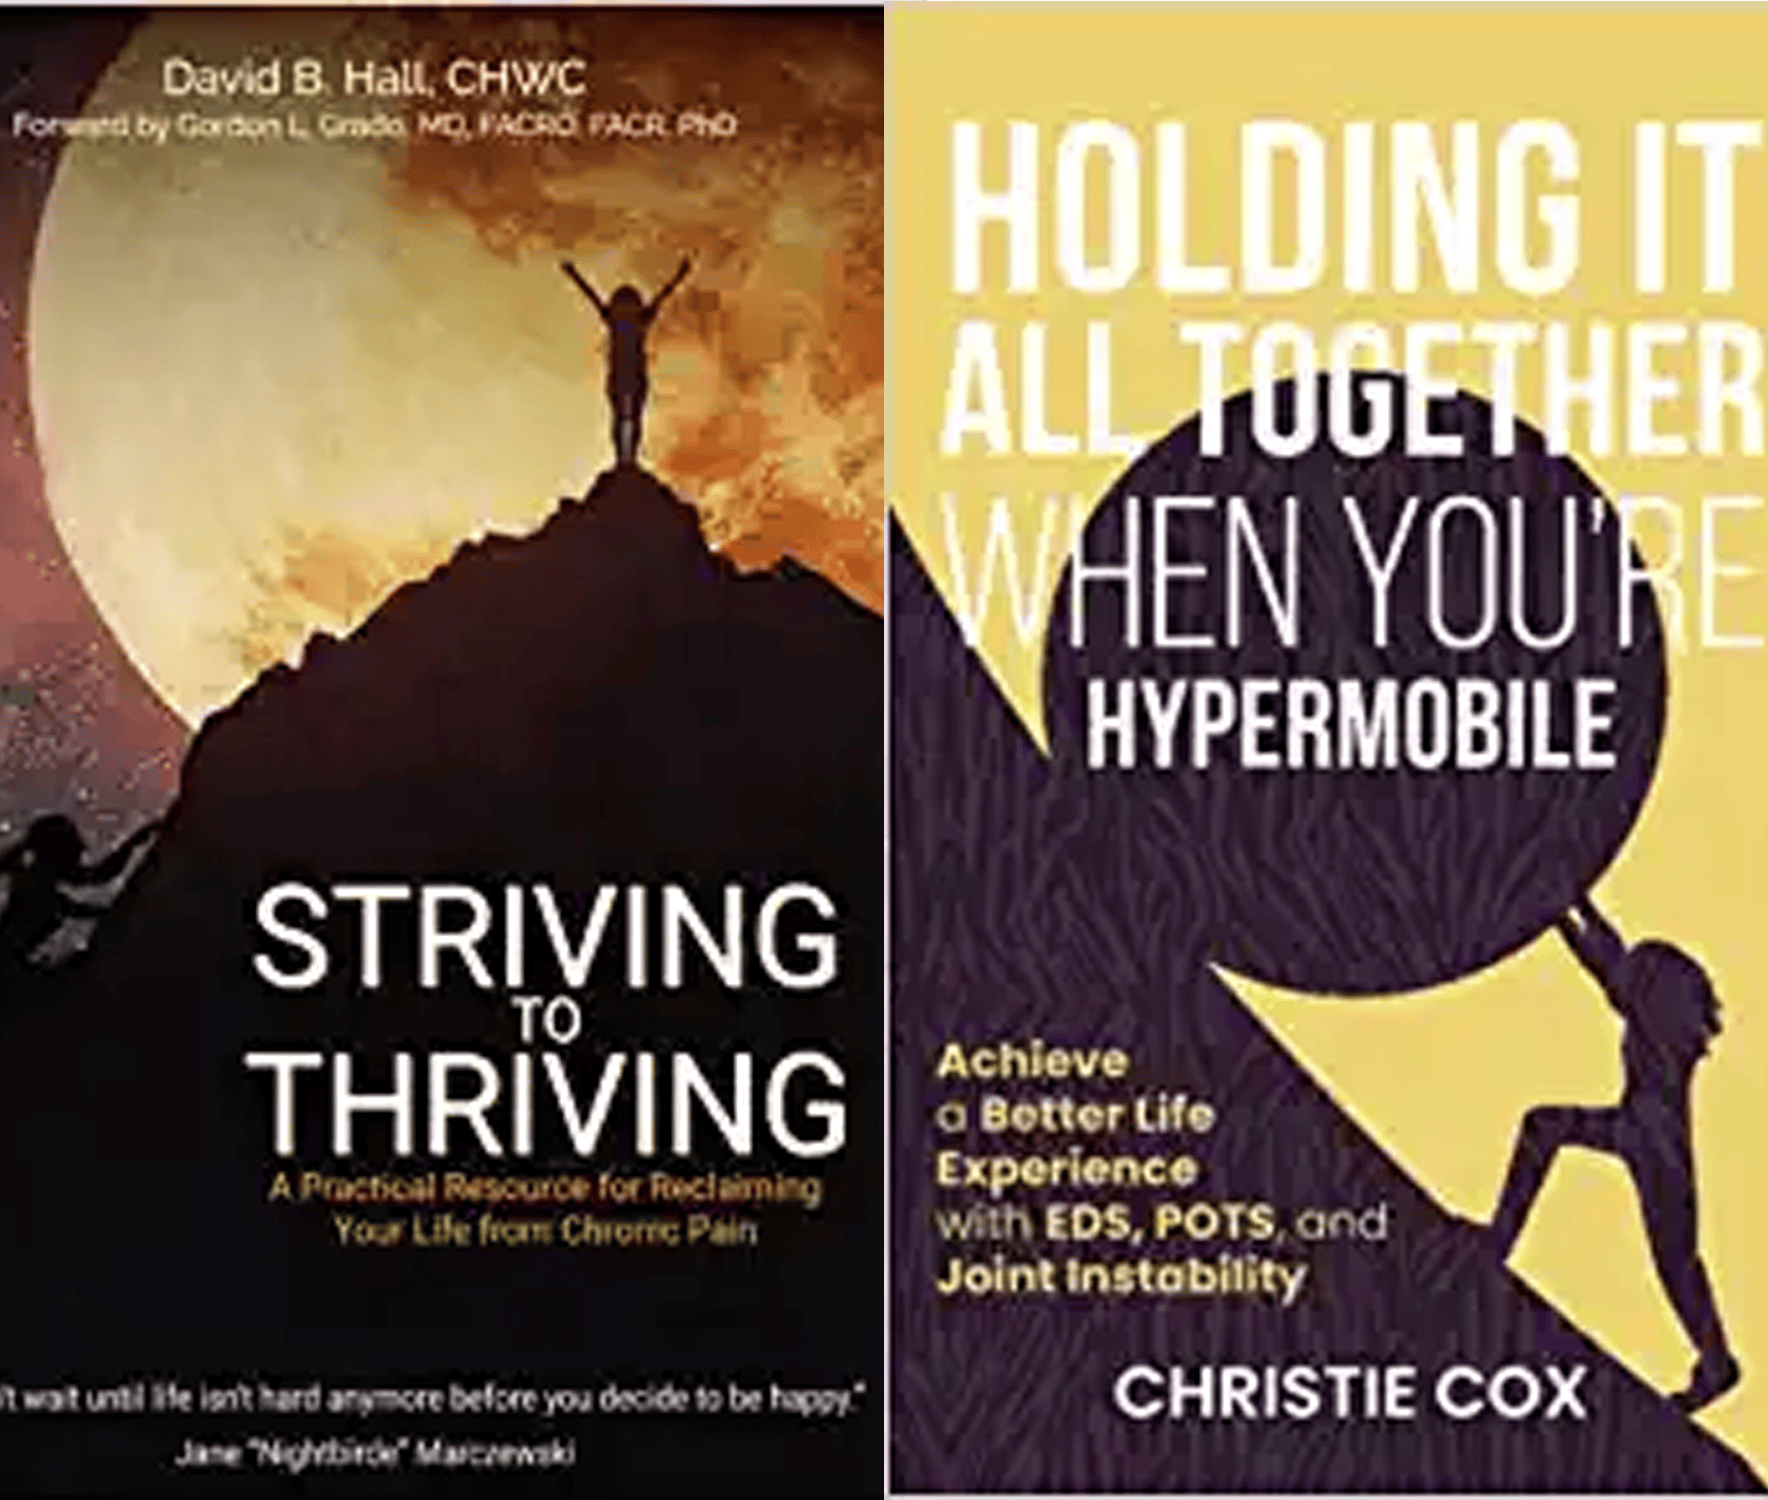 Two U.S. Pain Foundation Support Group Leaders’ Books Published